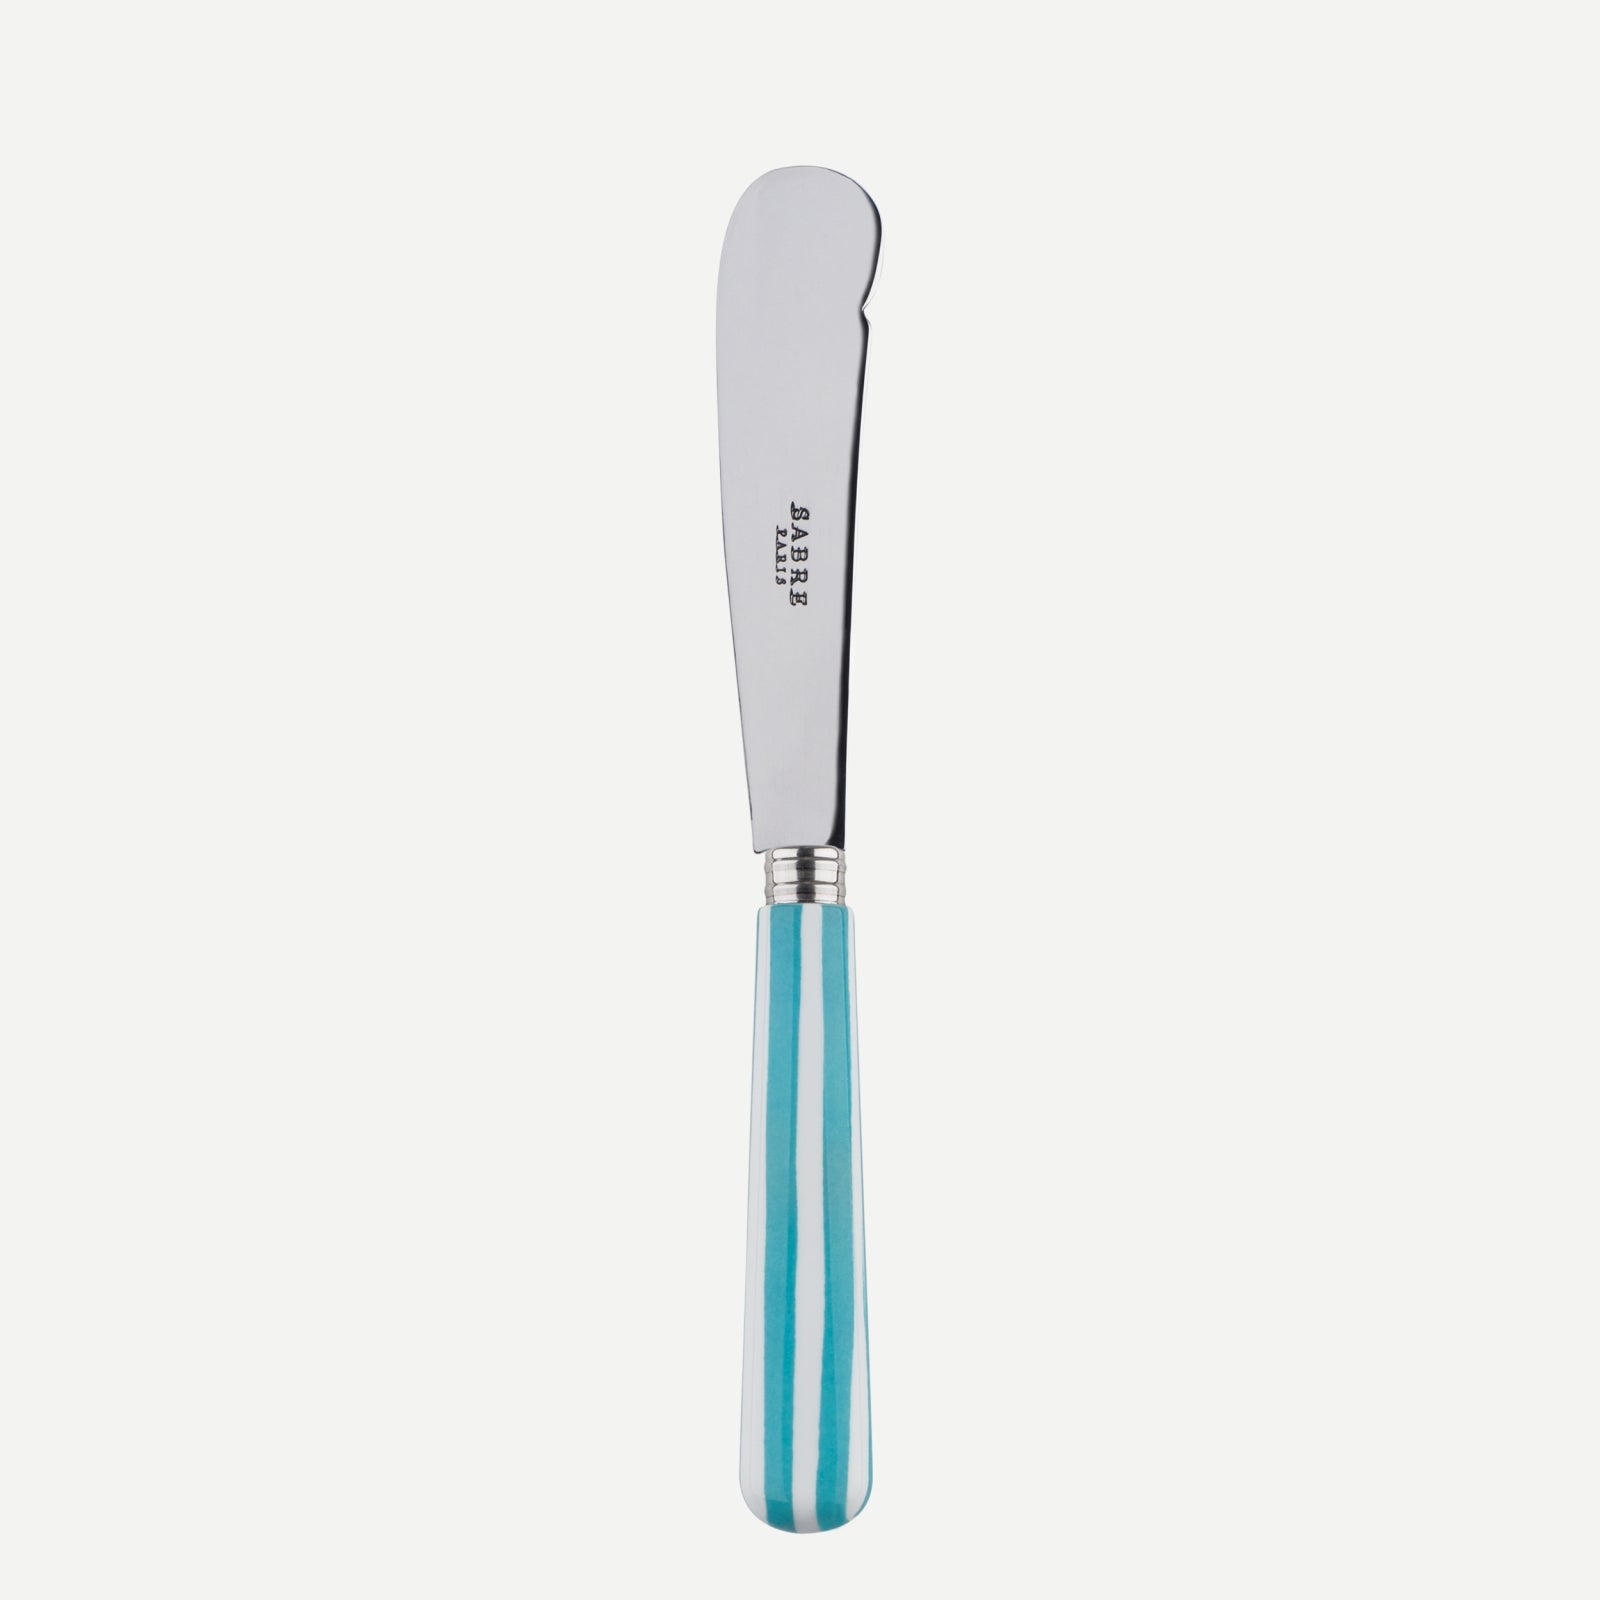 Butter knife - White Stripe - Turquoise